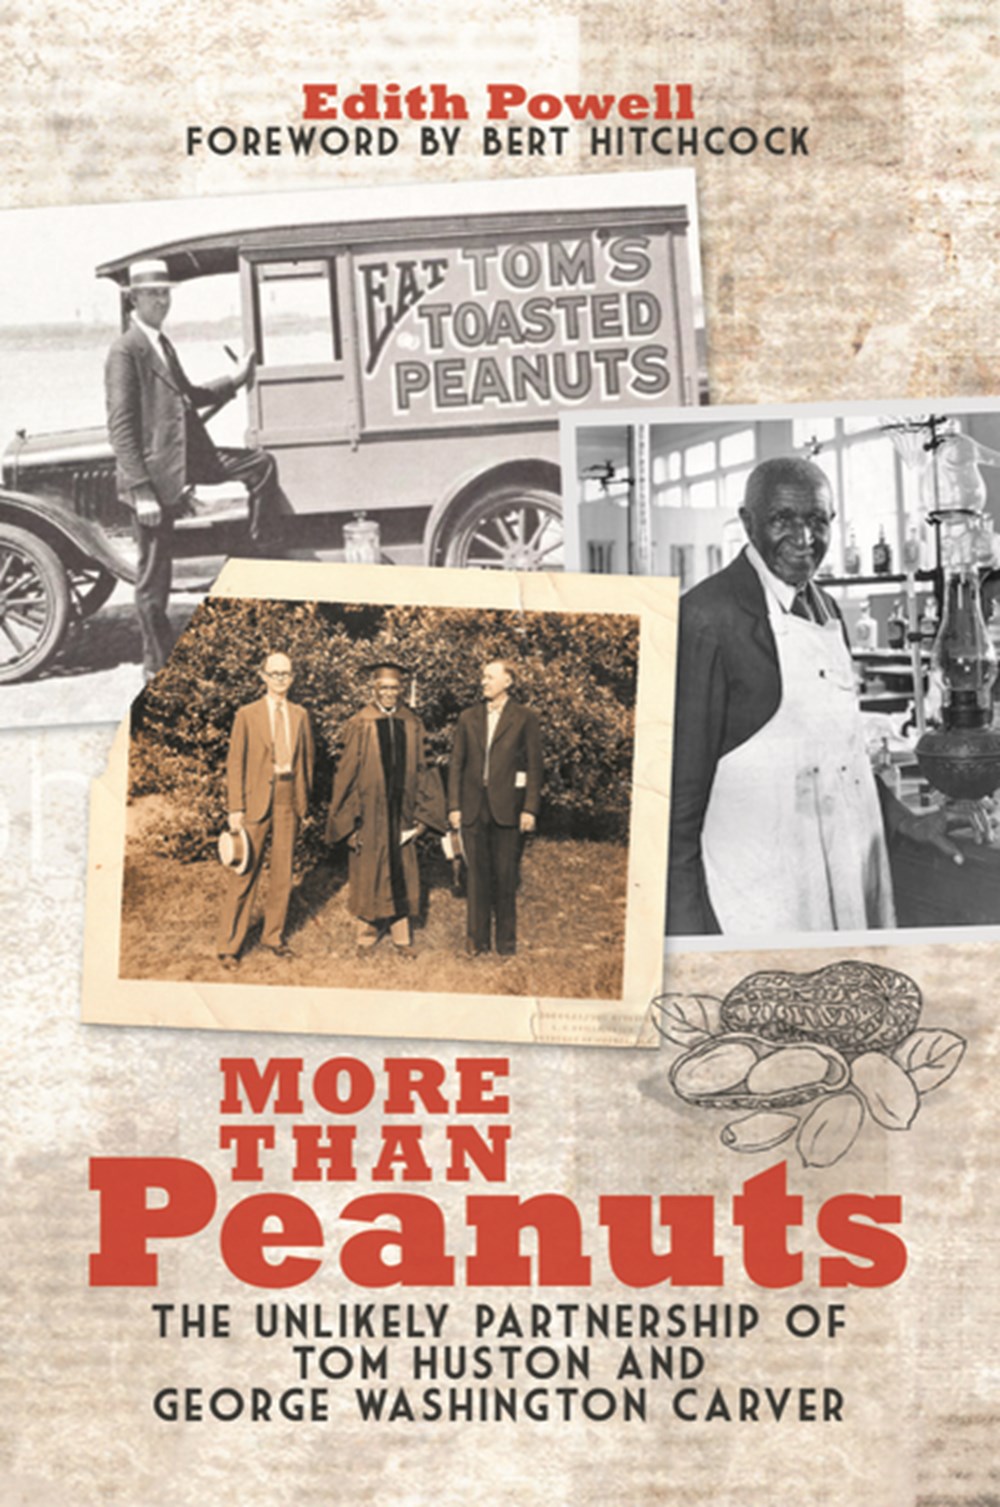 More Than Peanuts The Unlikely Partnership of Tom Huston and George Washington Carver